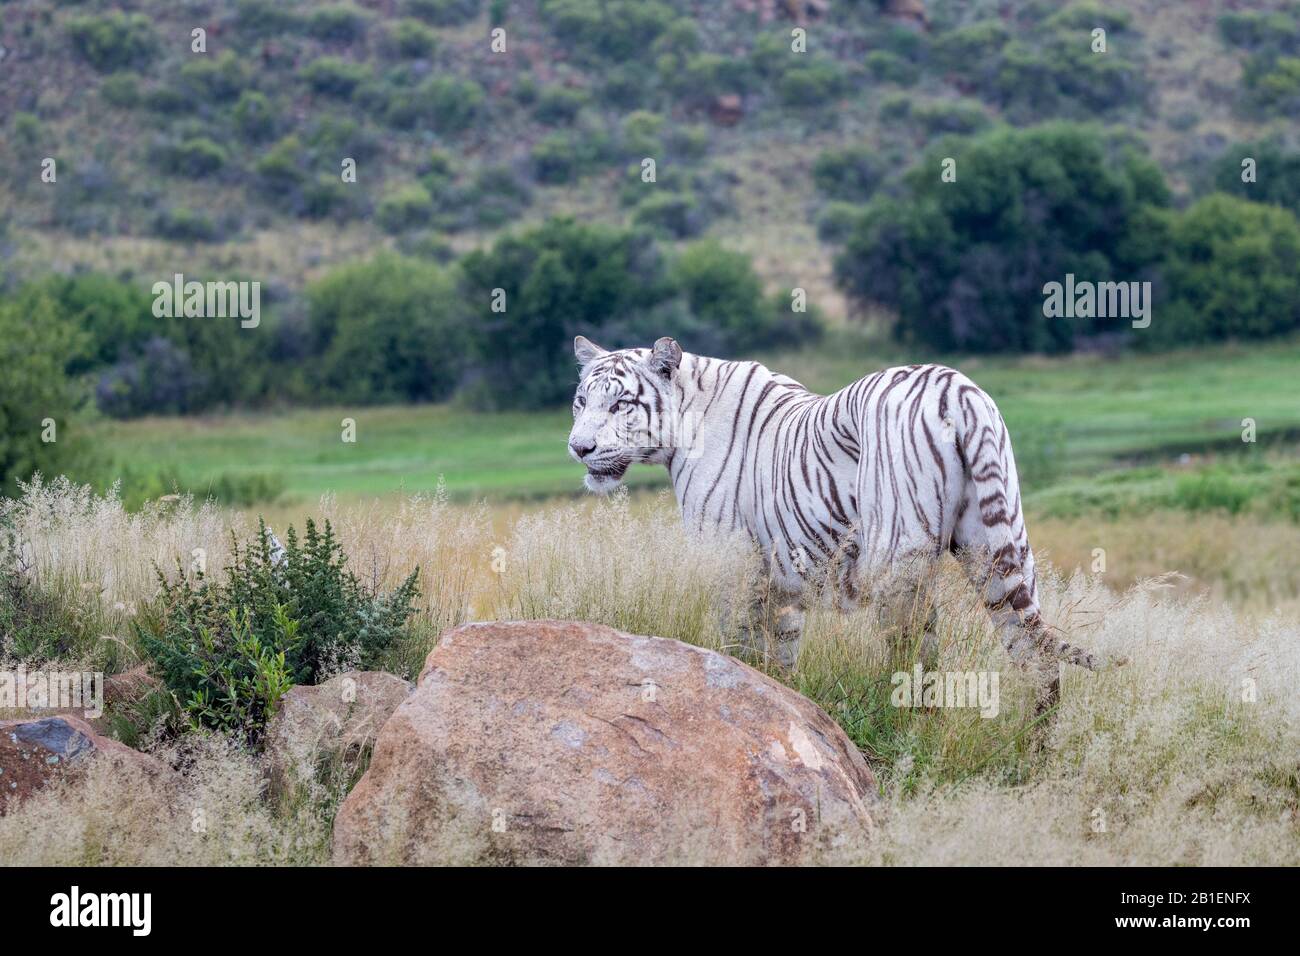 Asian (Bengal) Tiger (Panthera tigris tigris), White tiger, adult female, Private reserve, South Africa Stock Photo